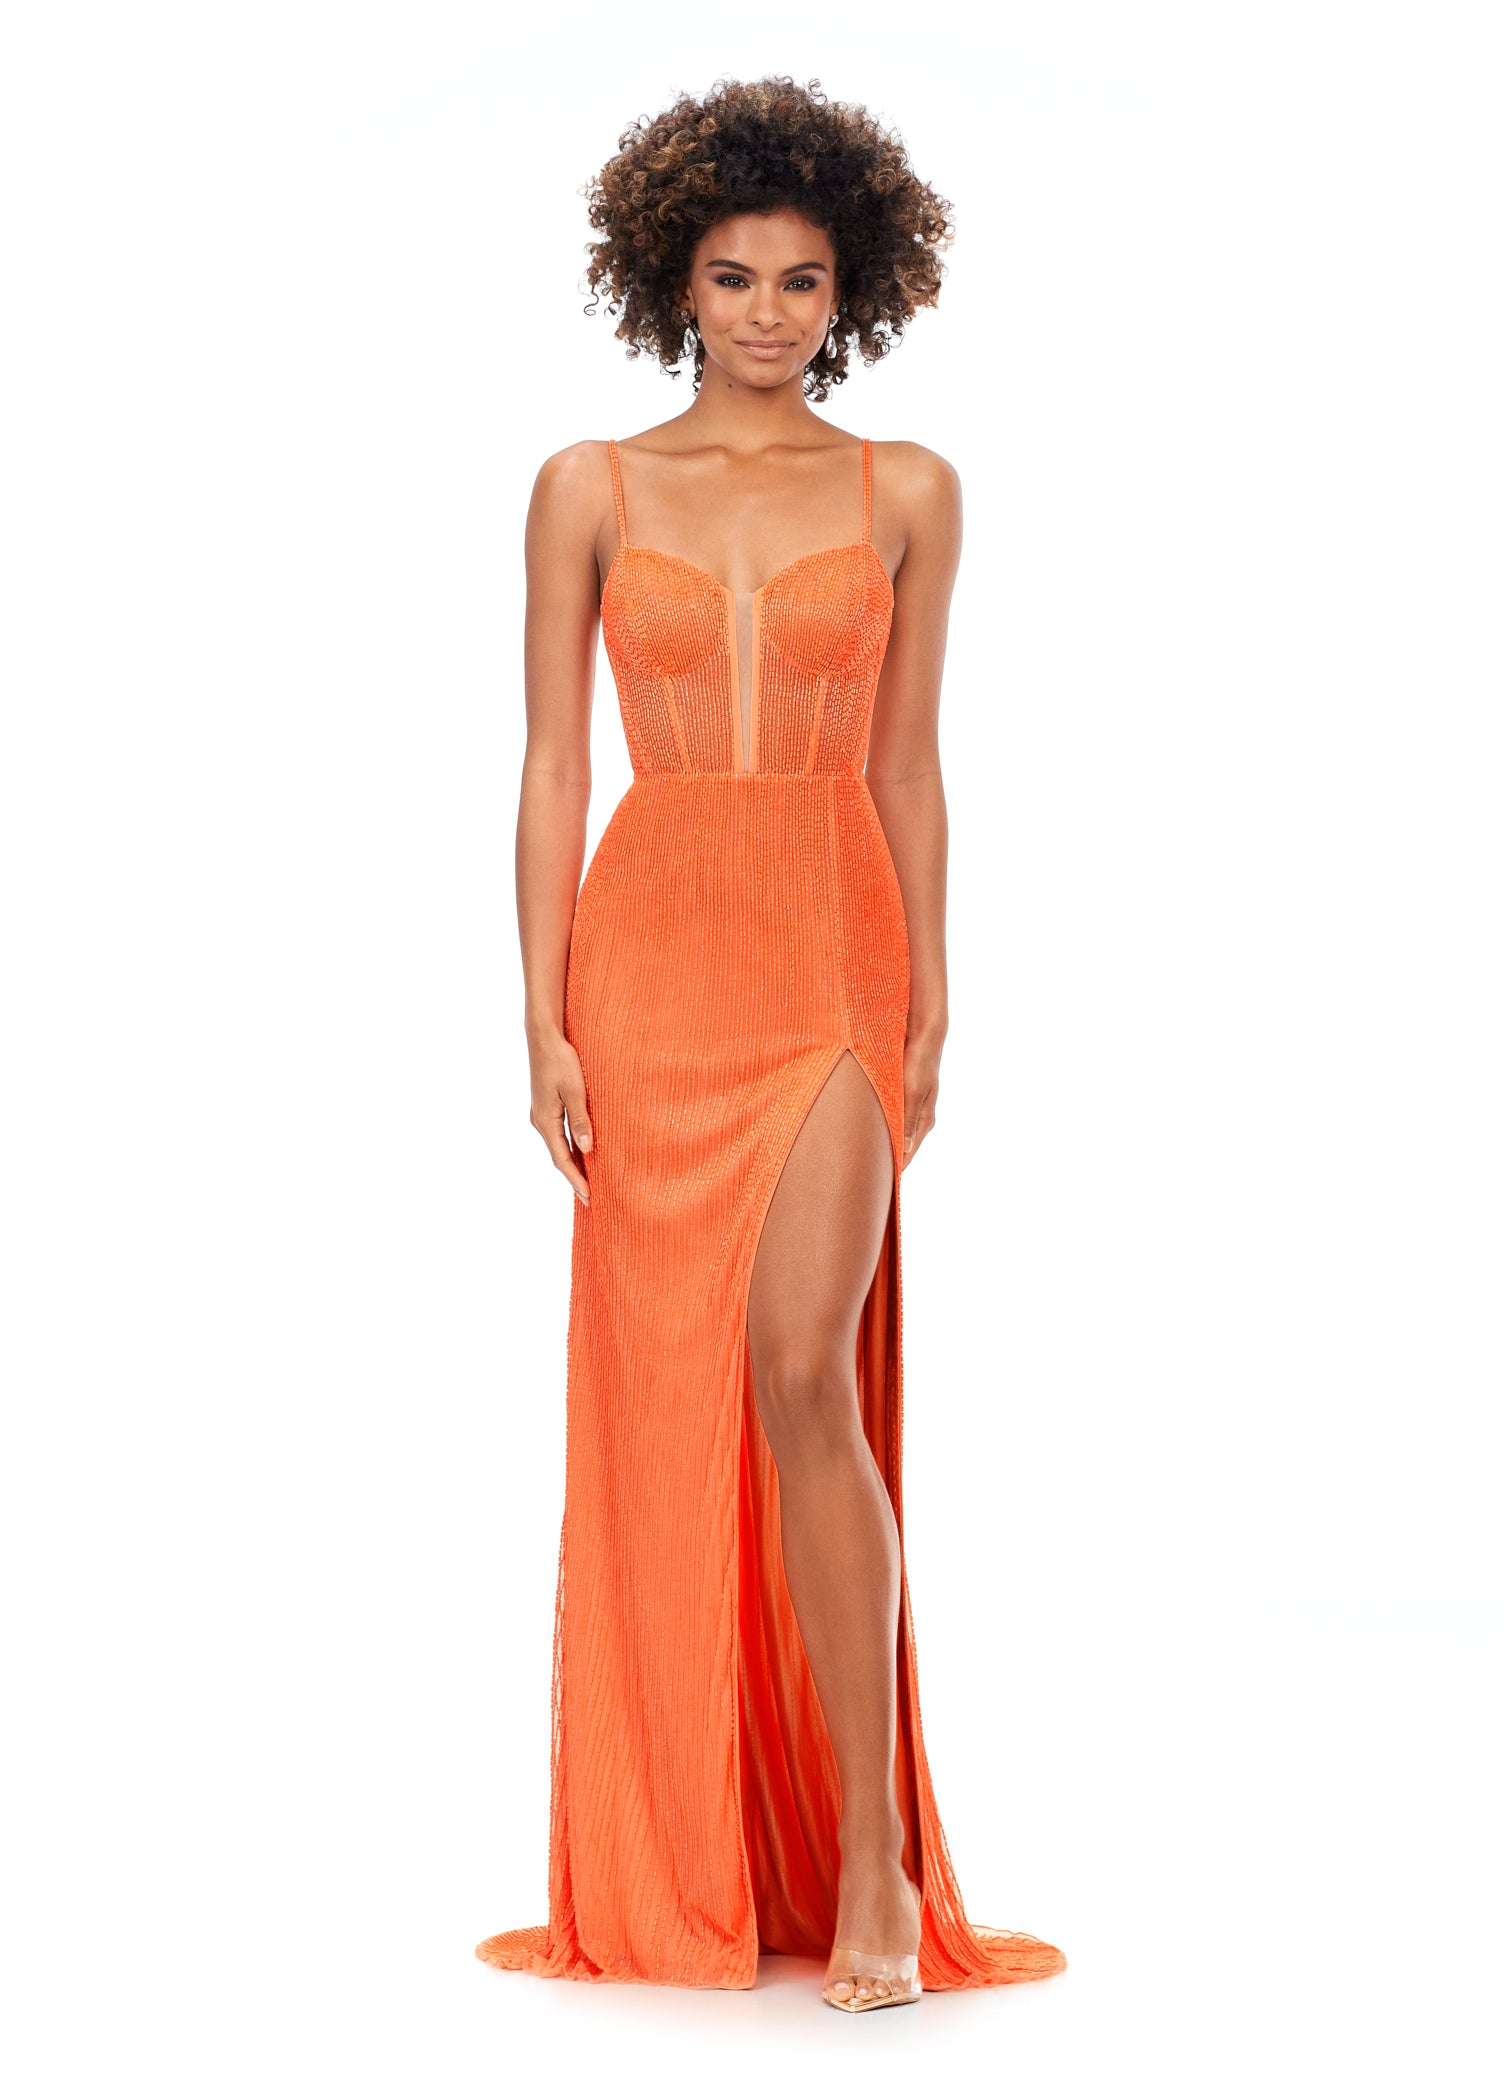 Ashley Lauren 11369 This Coral liquid beaded style features an exposed bustier that is sure to accentuate your curves. The look is complete with sweep train and left leg slit.